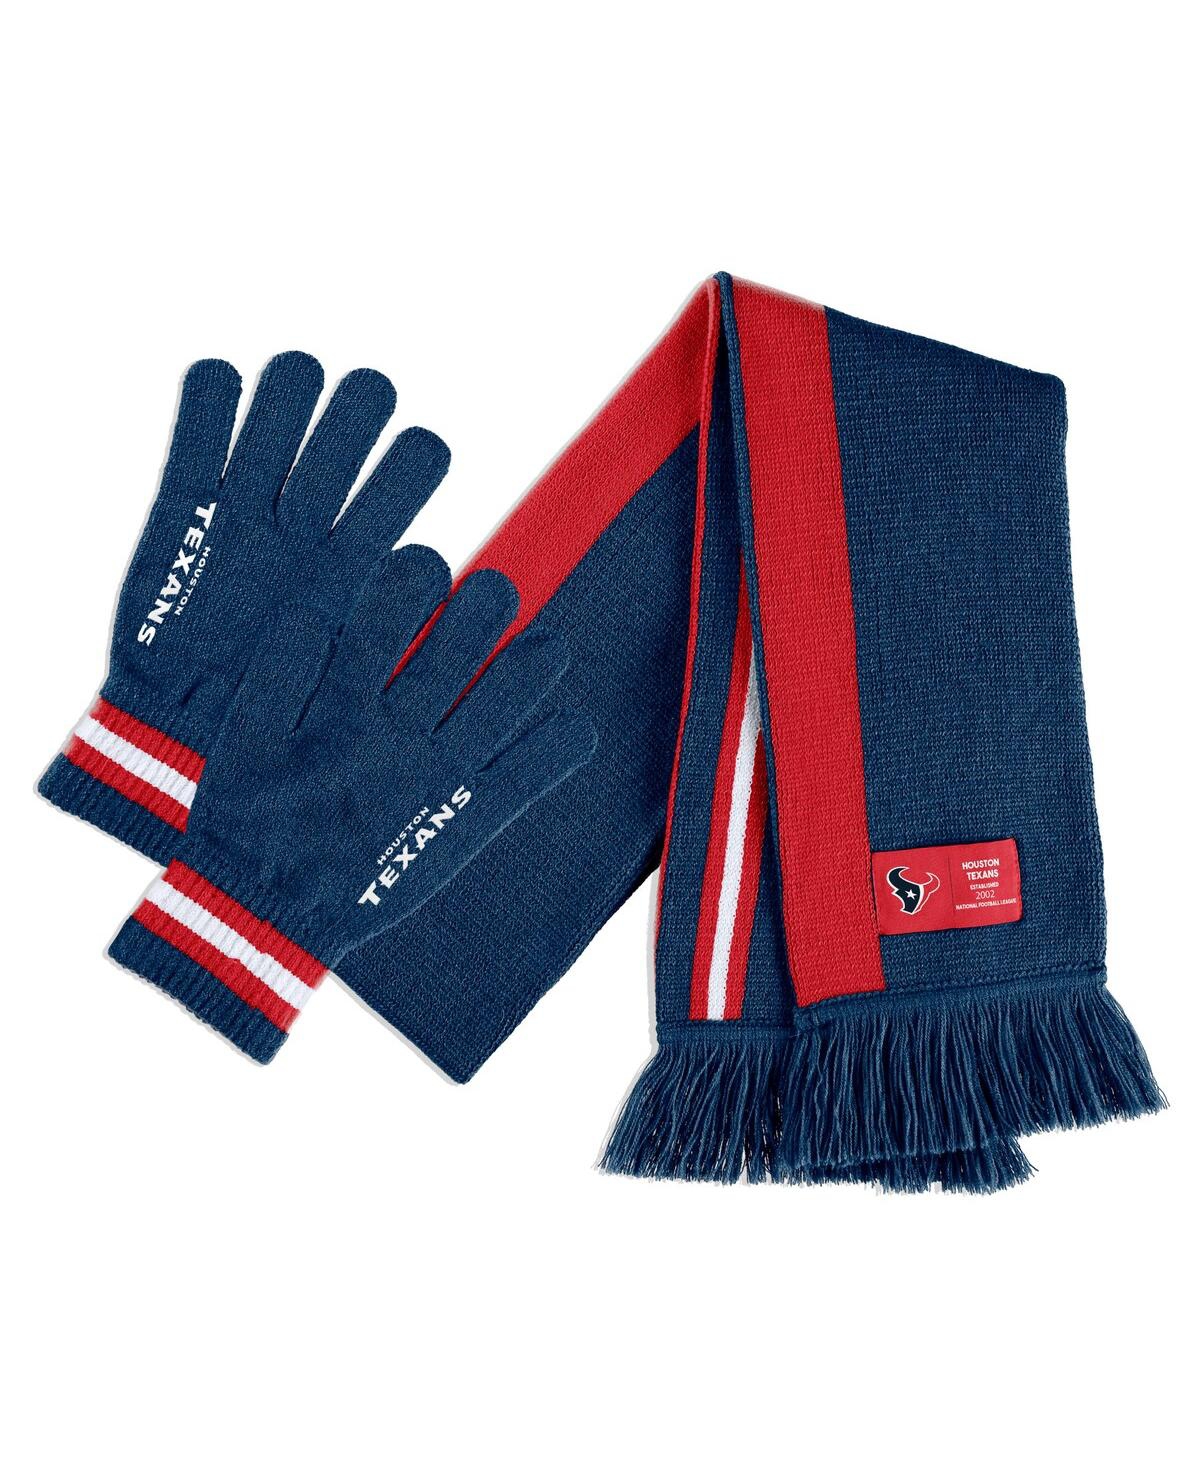 Women's Wear by Erin Andrews Houston Texans Scarf and Glove Set - Navy, Red